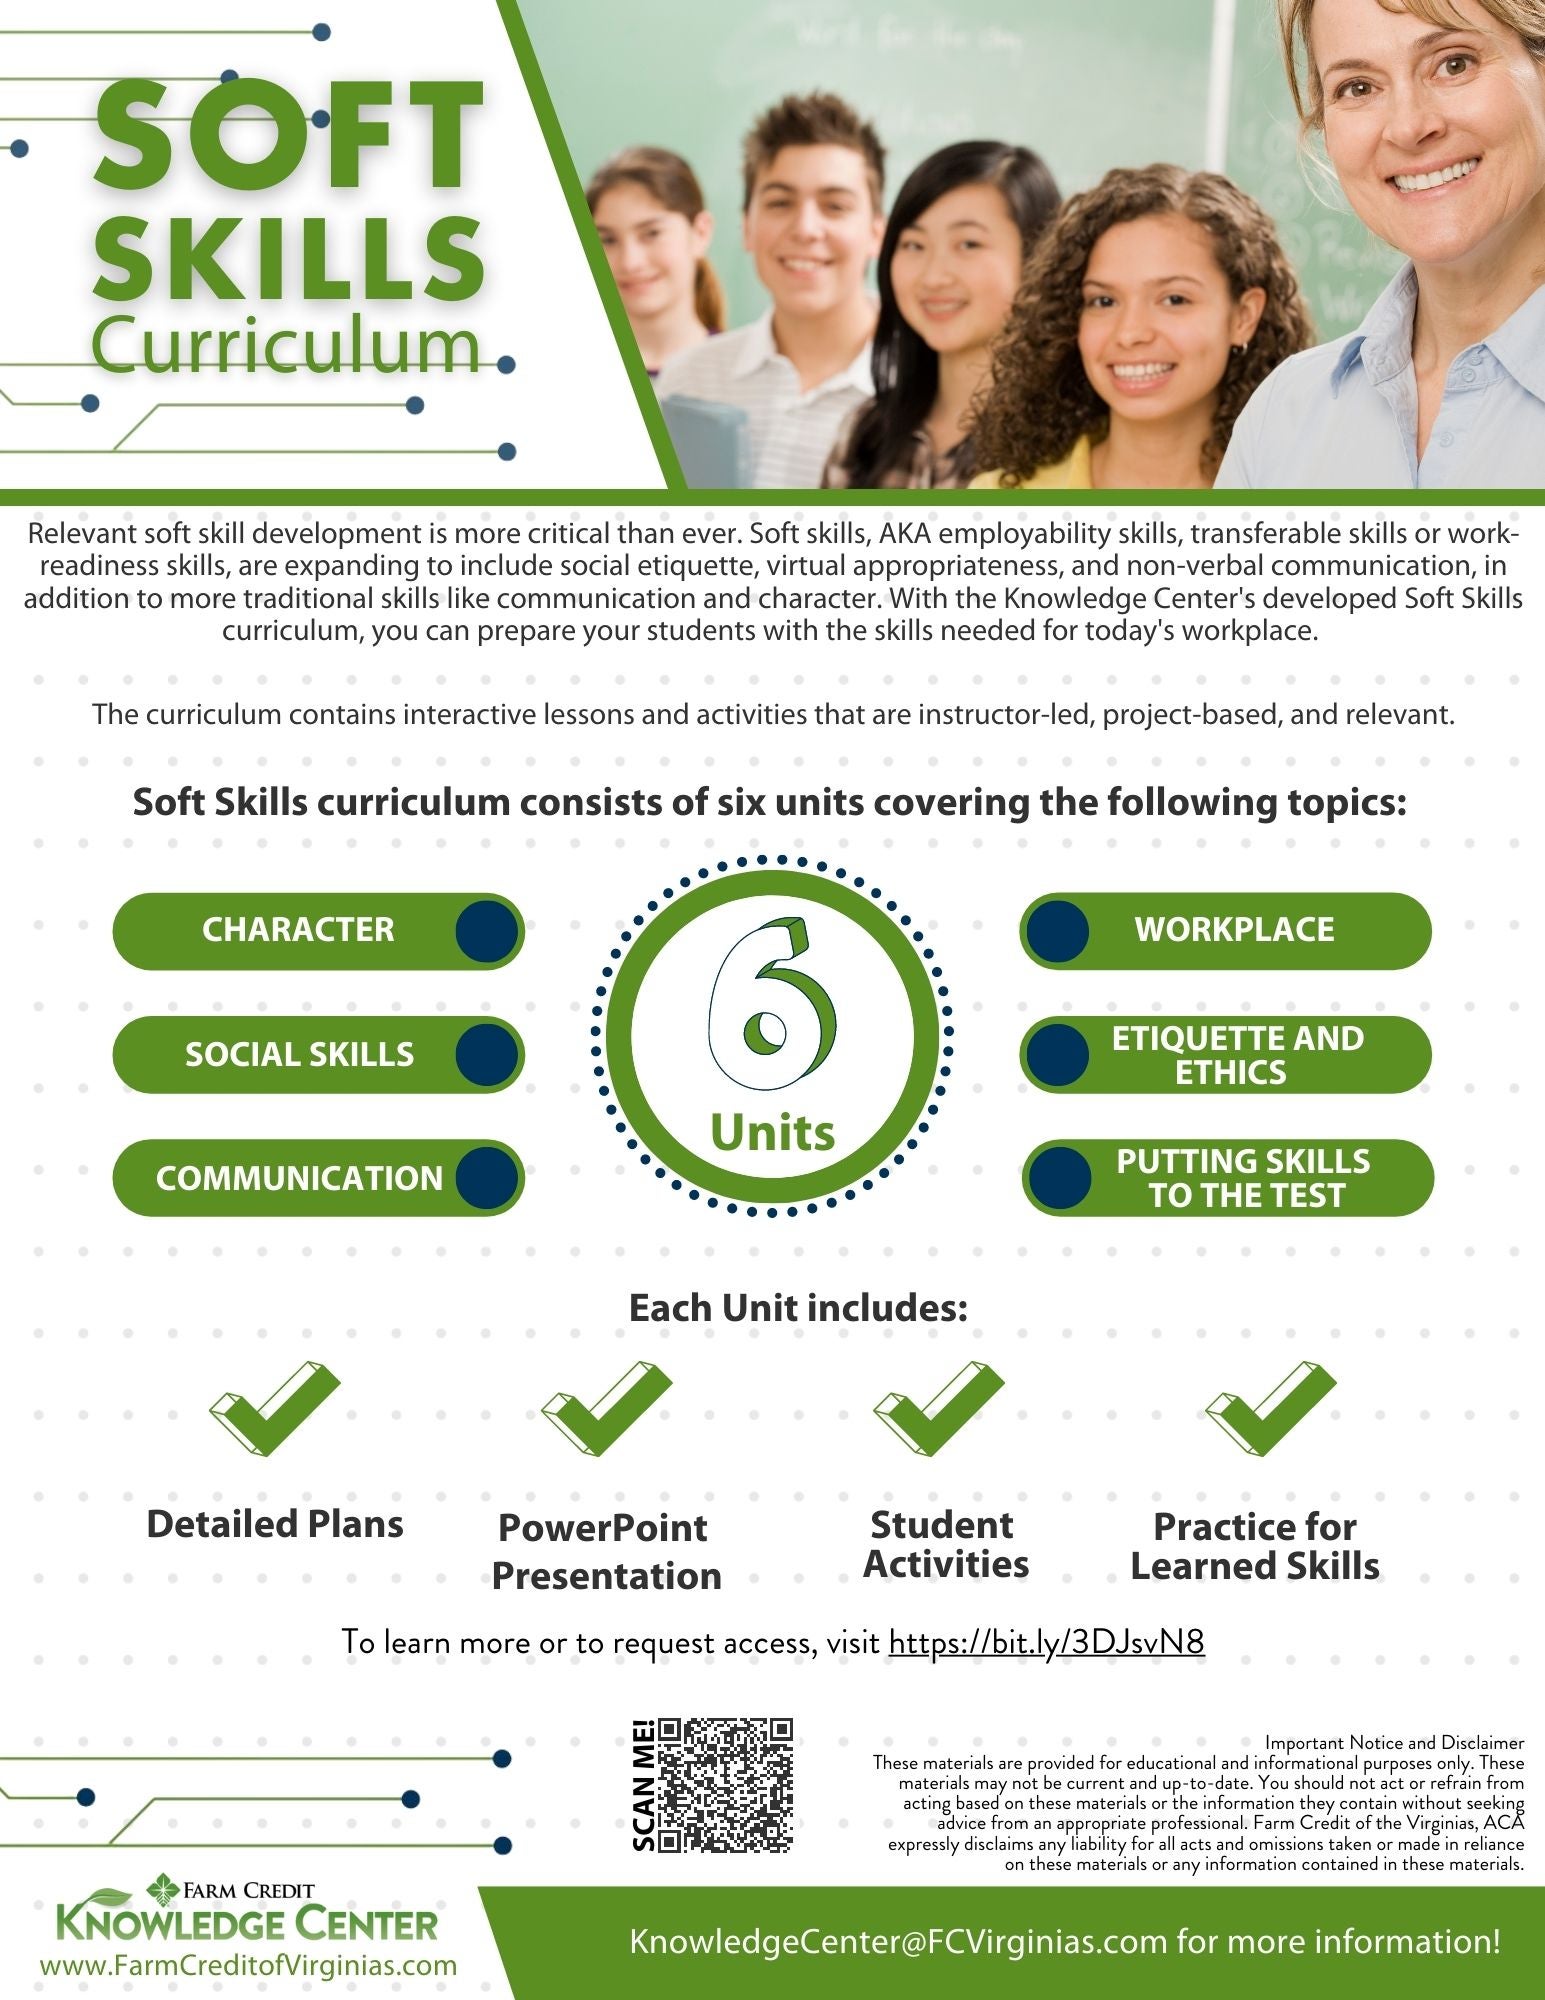 Access free soft skills curriculum for teaching job skills including communication, workplace, etiquette and more!